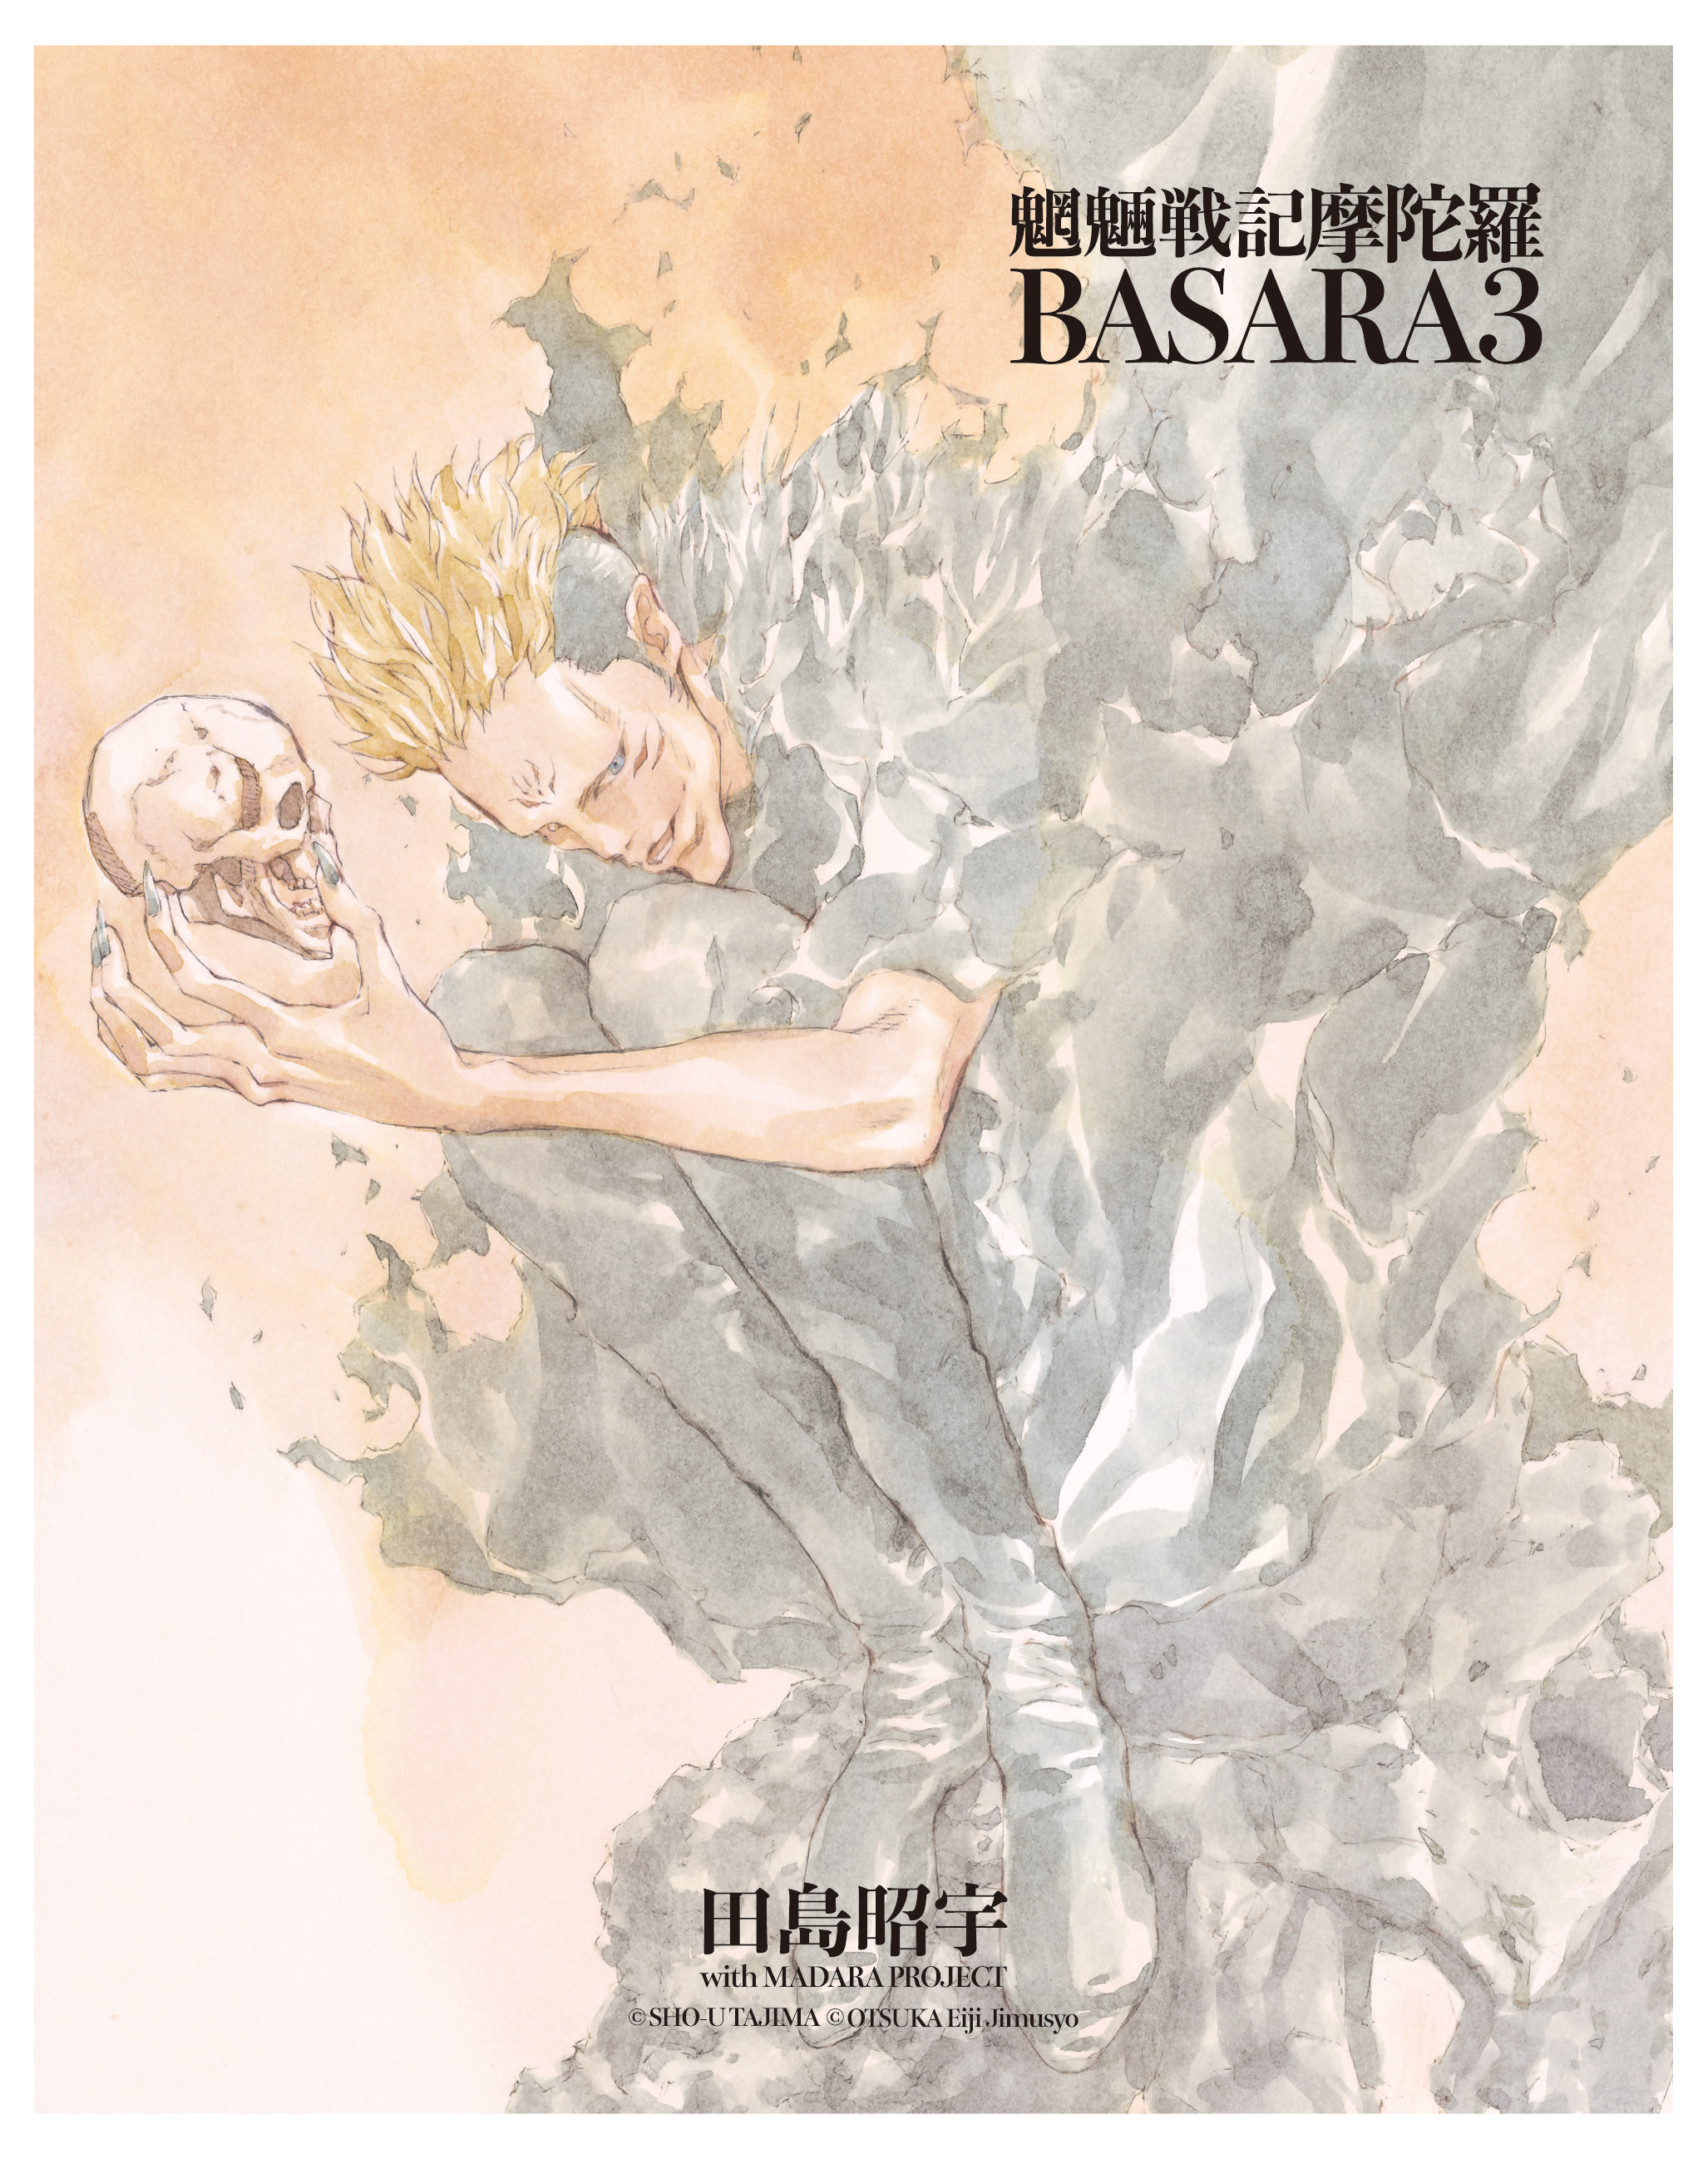 MADARA ARCHIVES 4 魍魎戦記摩陀羅BASARA」田島昭宇withMADARAPROJECT